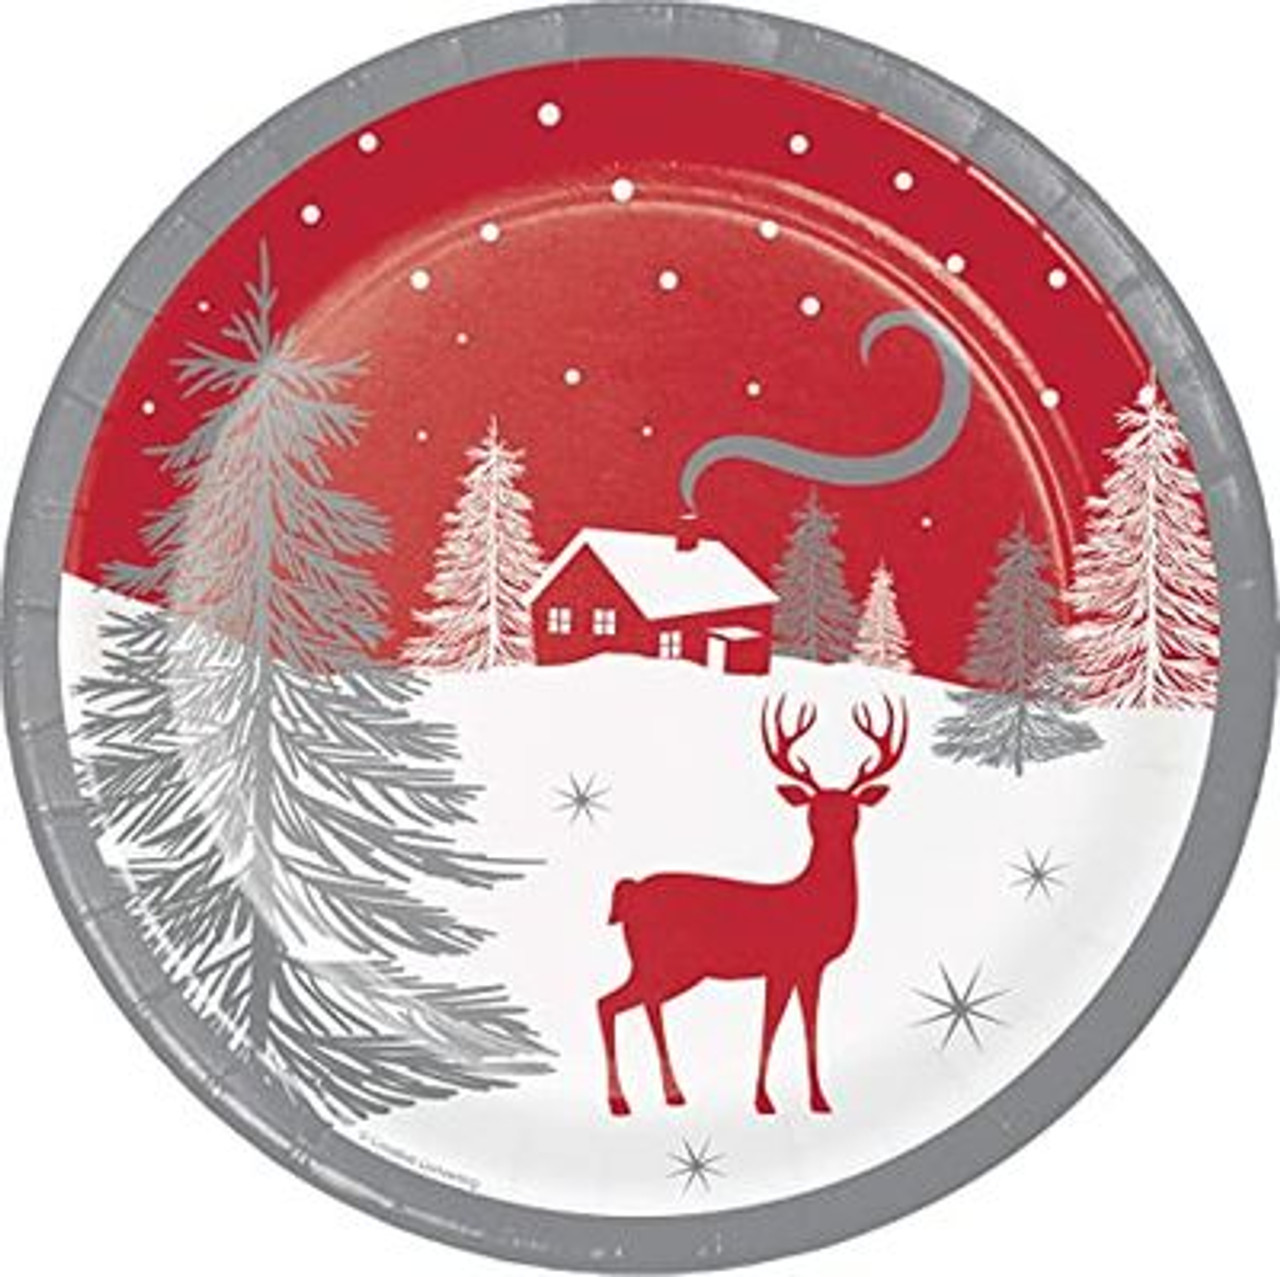 https://cdn11.bigcommerce.com/s-hgqmwywp99/images/stencil/1280x1280/products/51949/46727/creative-converting-winter-wonder-9-christmas-luncheon-paper-plates-8ct-6__53564.1675880483.jpg?c=1?imbypass=on